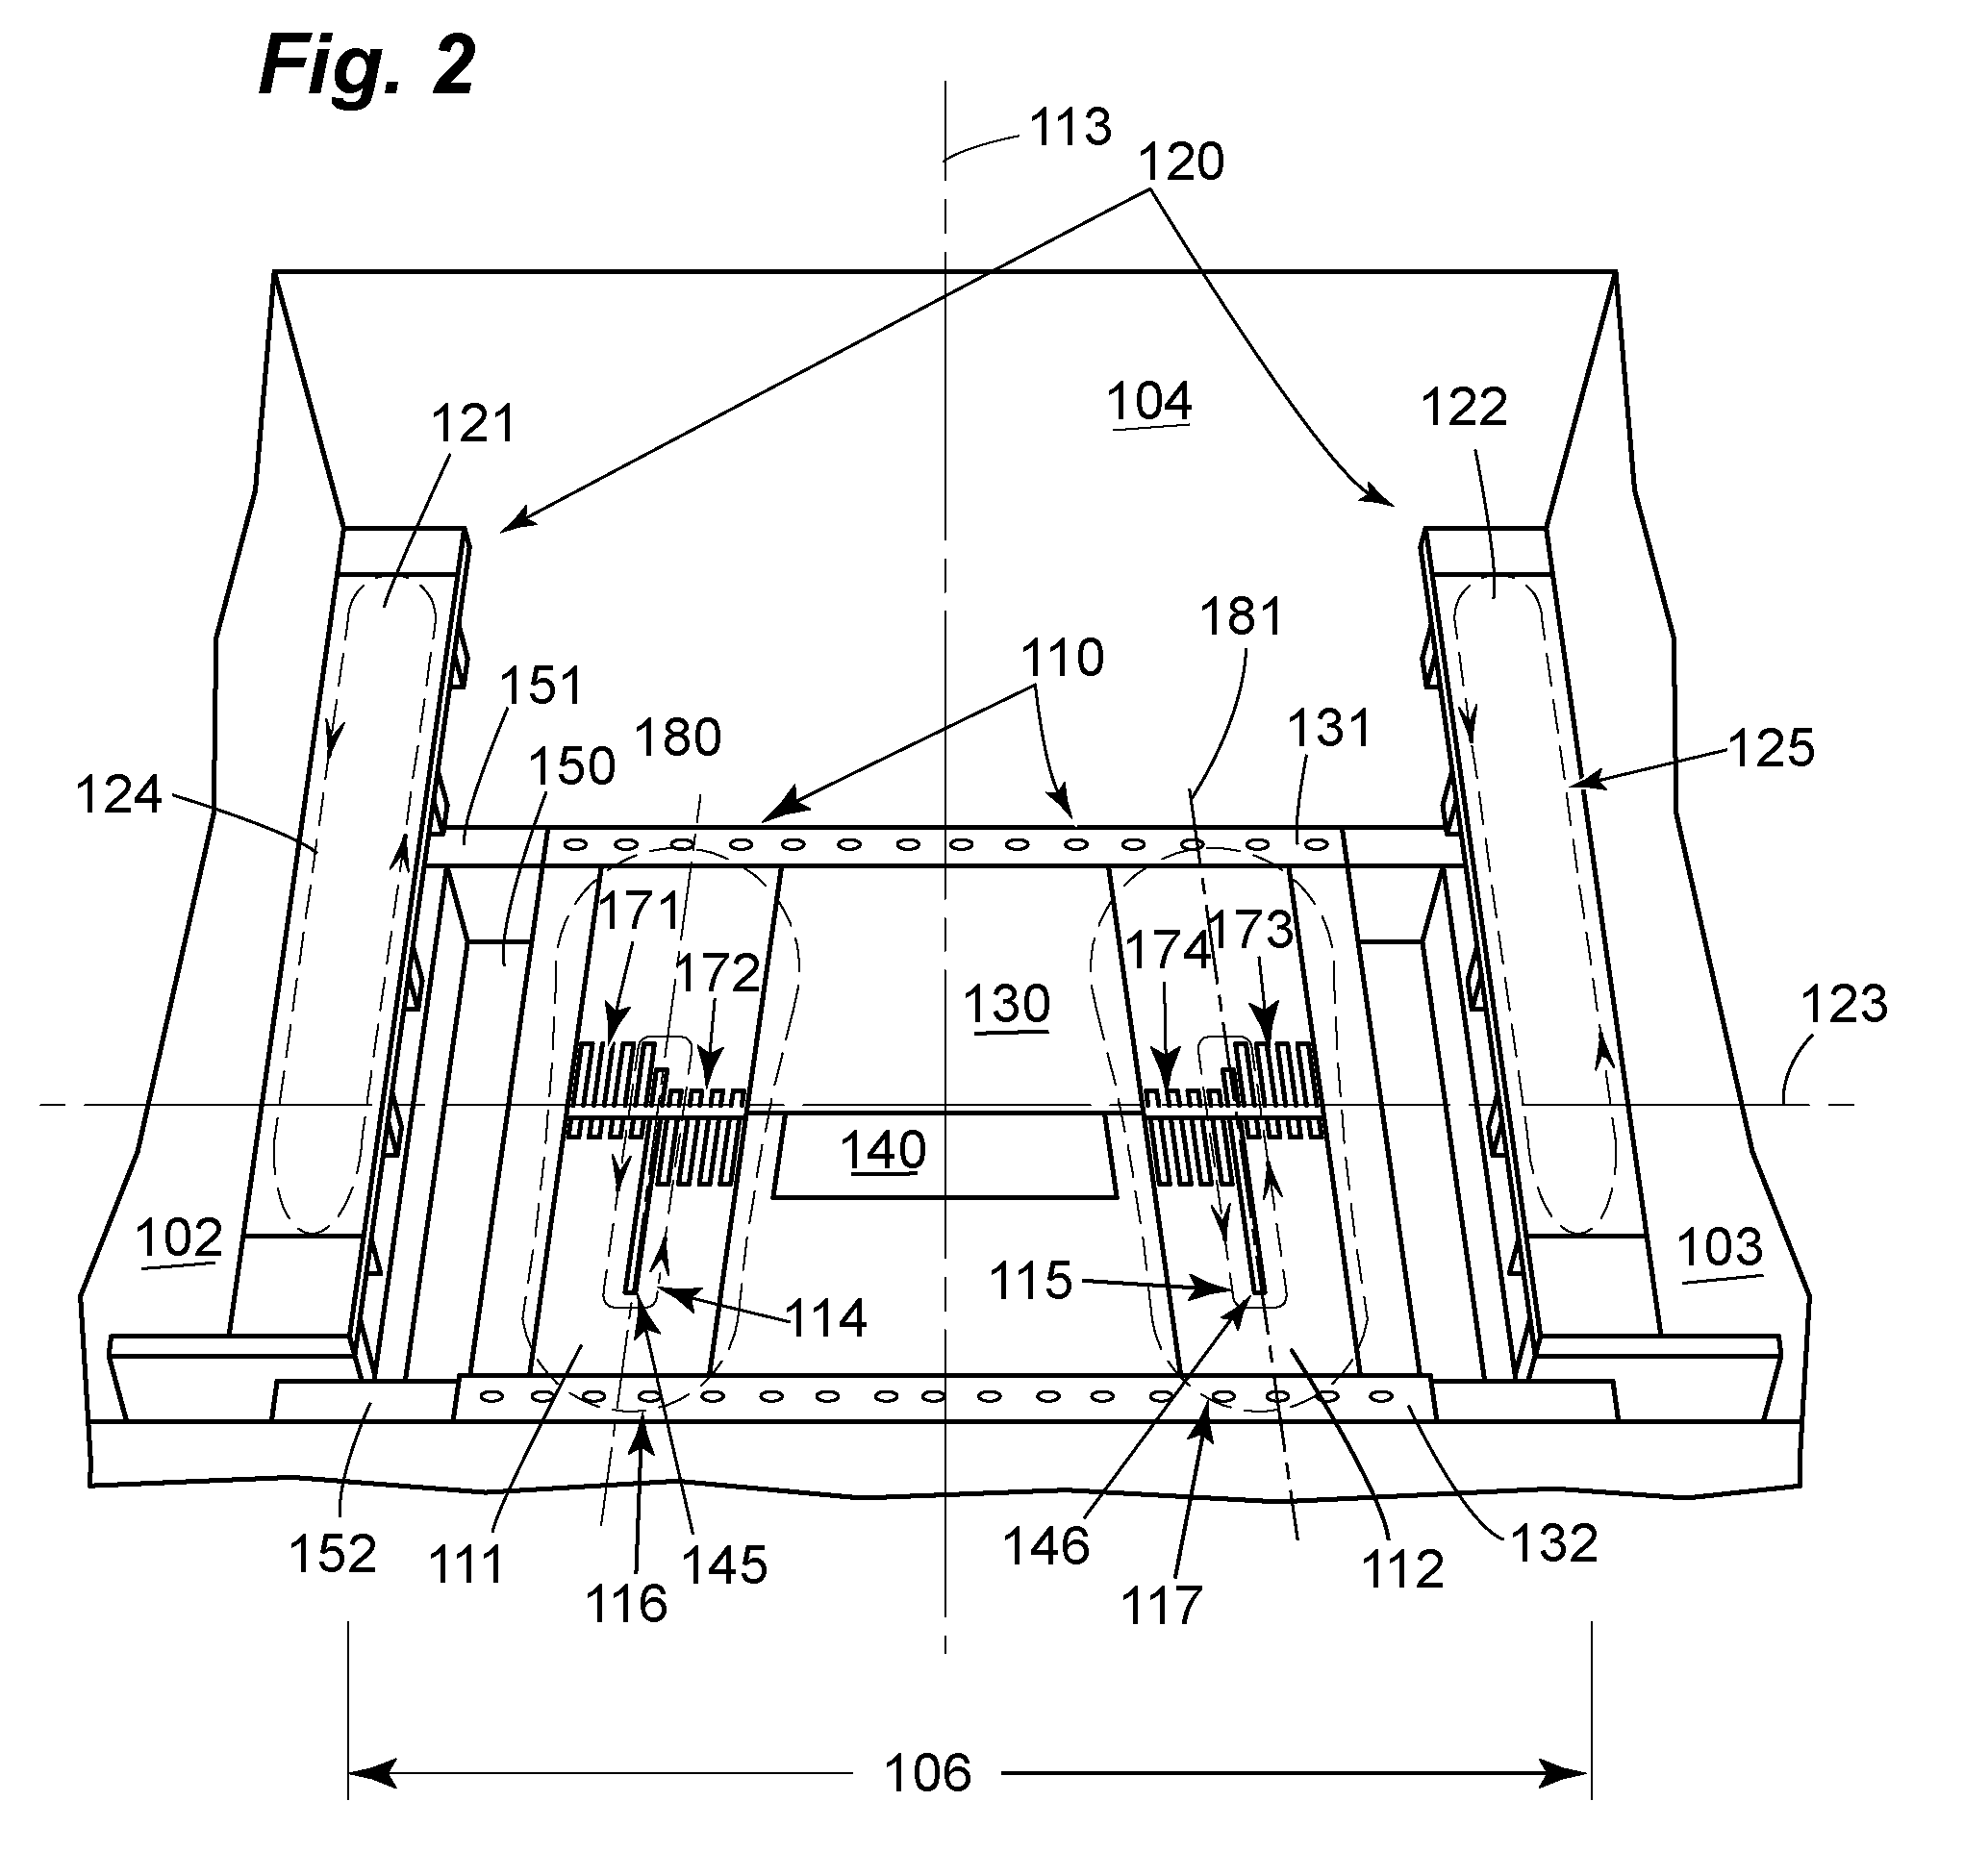 Apparatus and method for non-symmetric magnetic field balancing in an inspection scanner